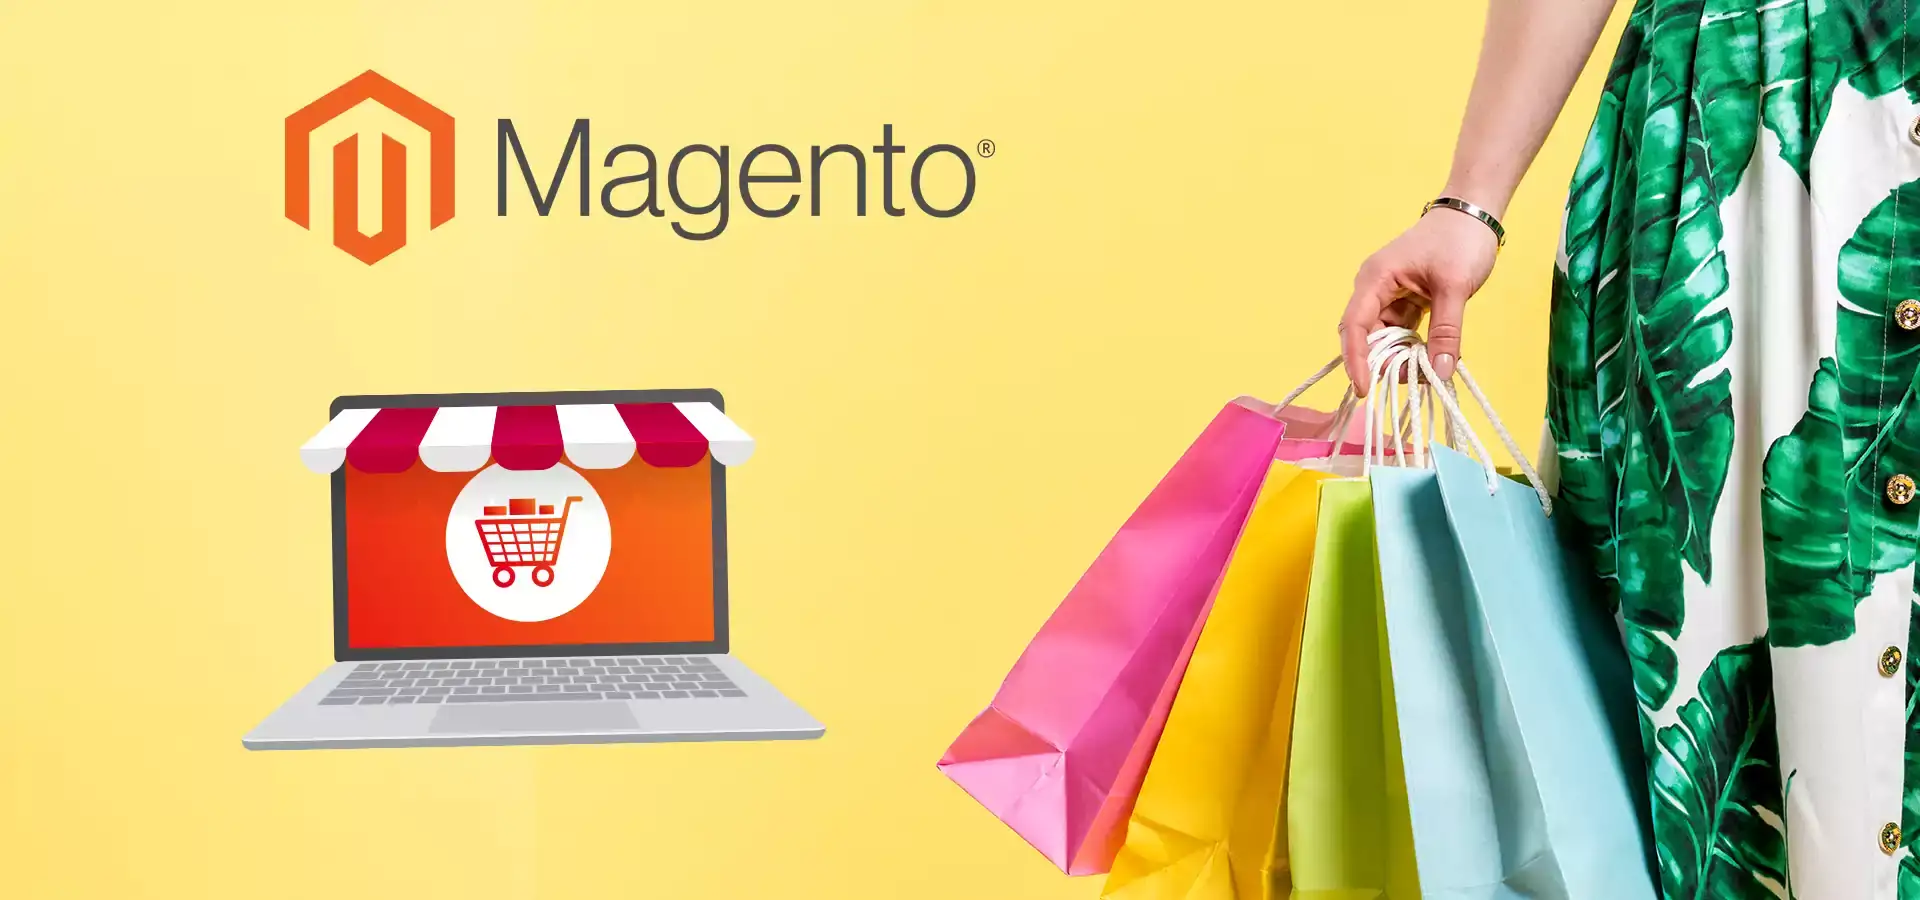 reasons-to-prove-that-magento-is-the-right-e-commerce-platform-related-blog-9